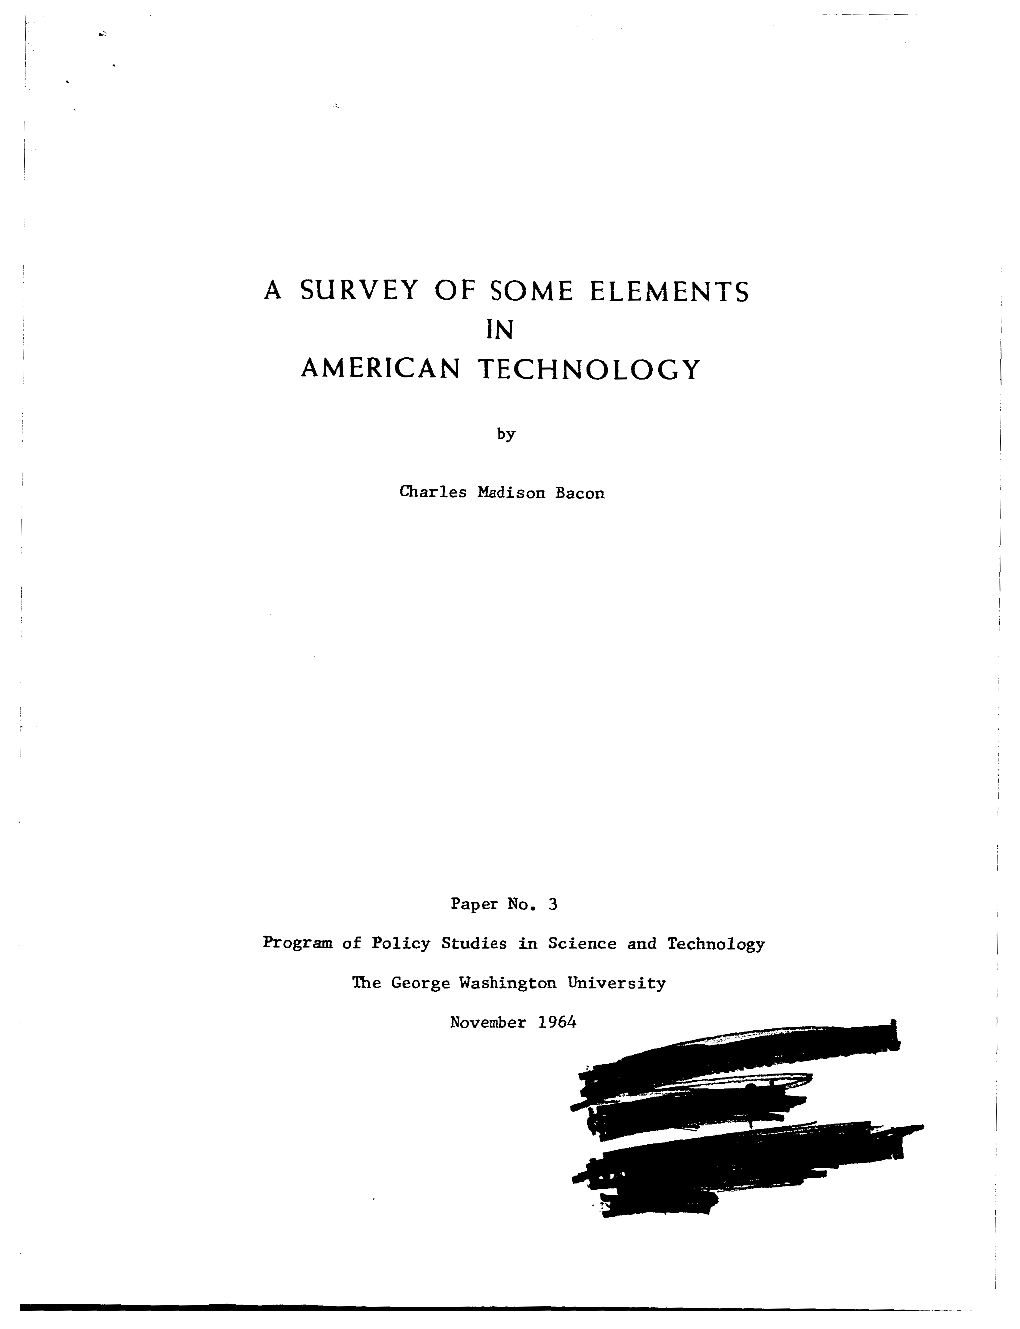 A Survey of Some Elements American Technology